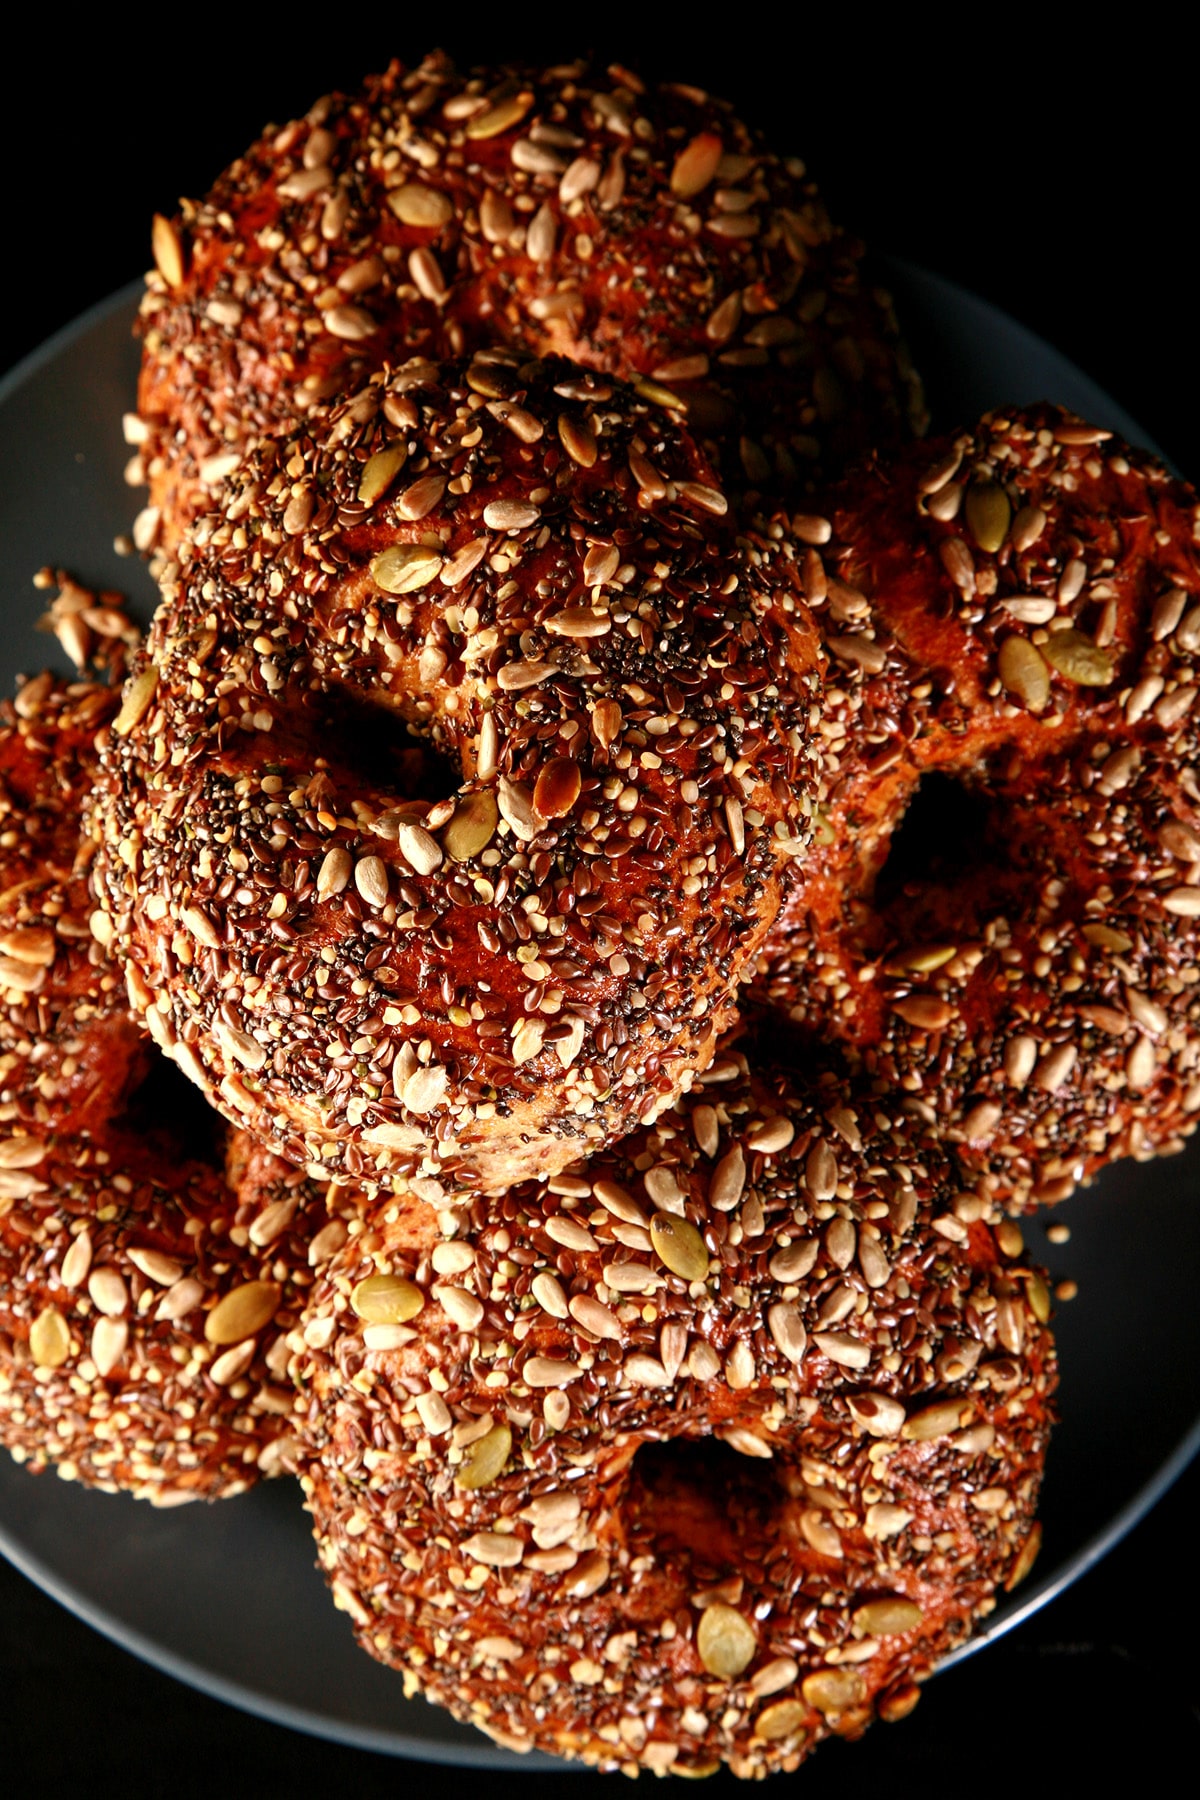 A plate stacked with a pile of whole wheat and flax bagels. The top side of each bagel is covered in a mix of seeds - pumpkin, sunflower, flax, sesame, chia, and poppy.